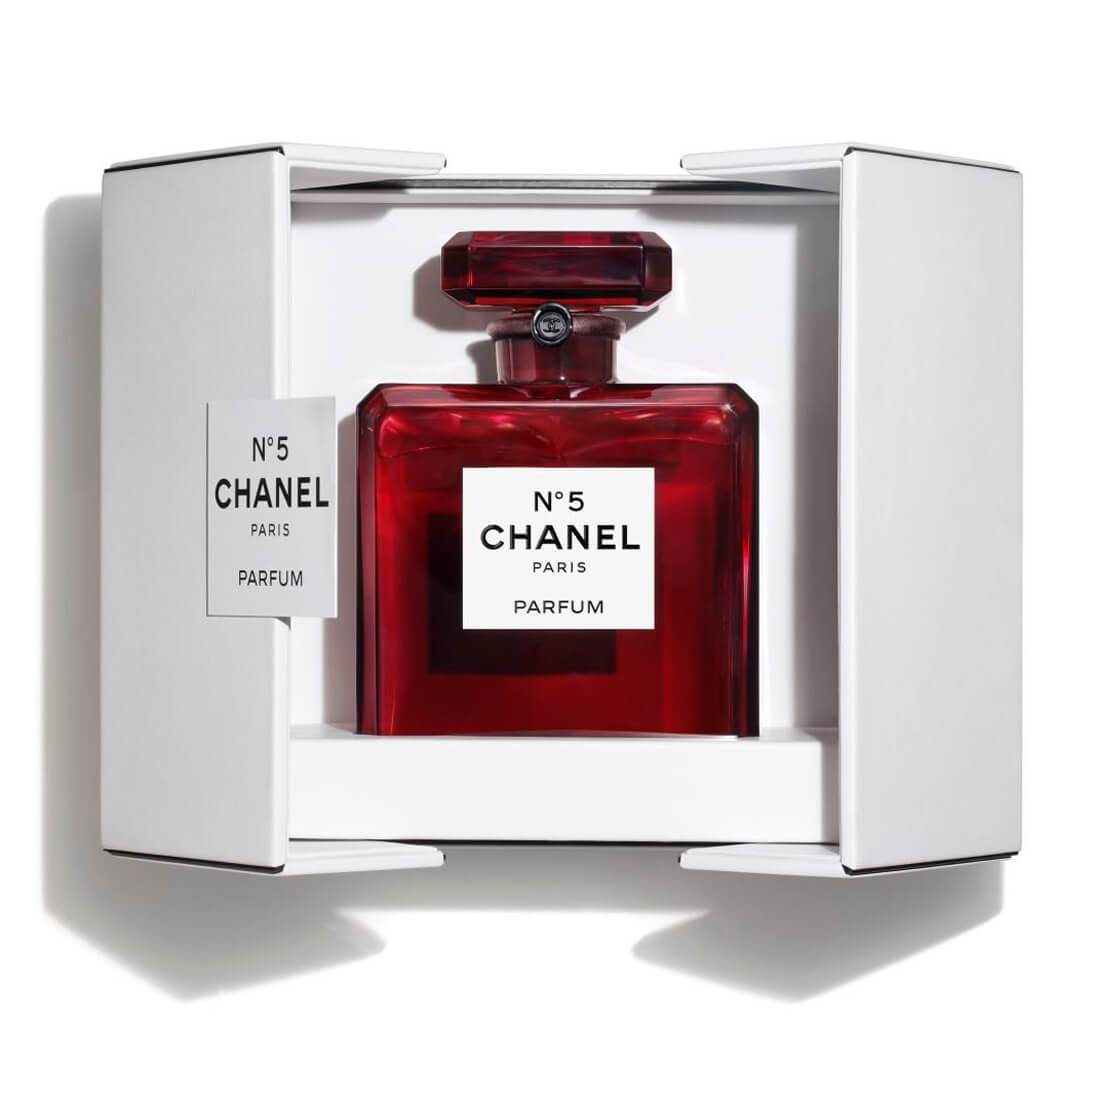 Chanel No 5 L'eau Rouge Limited Edition EDP 100ml Perfume For Women